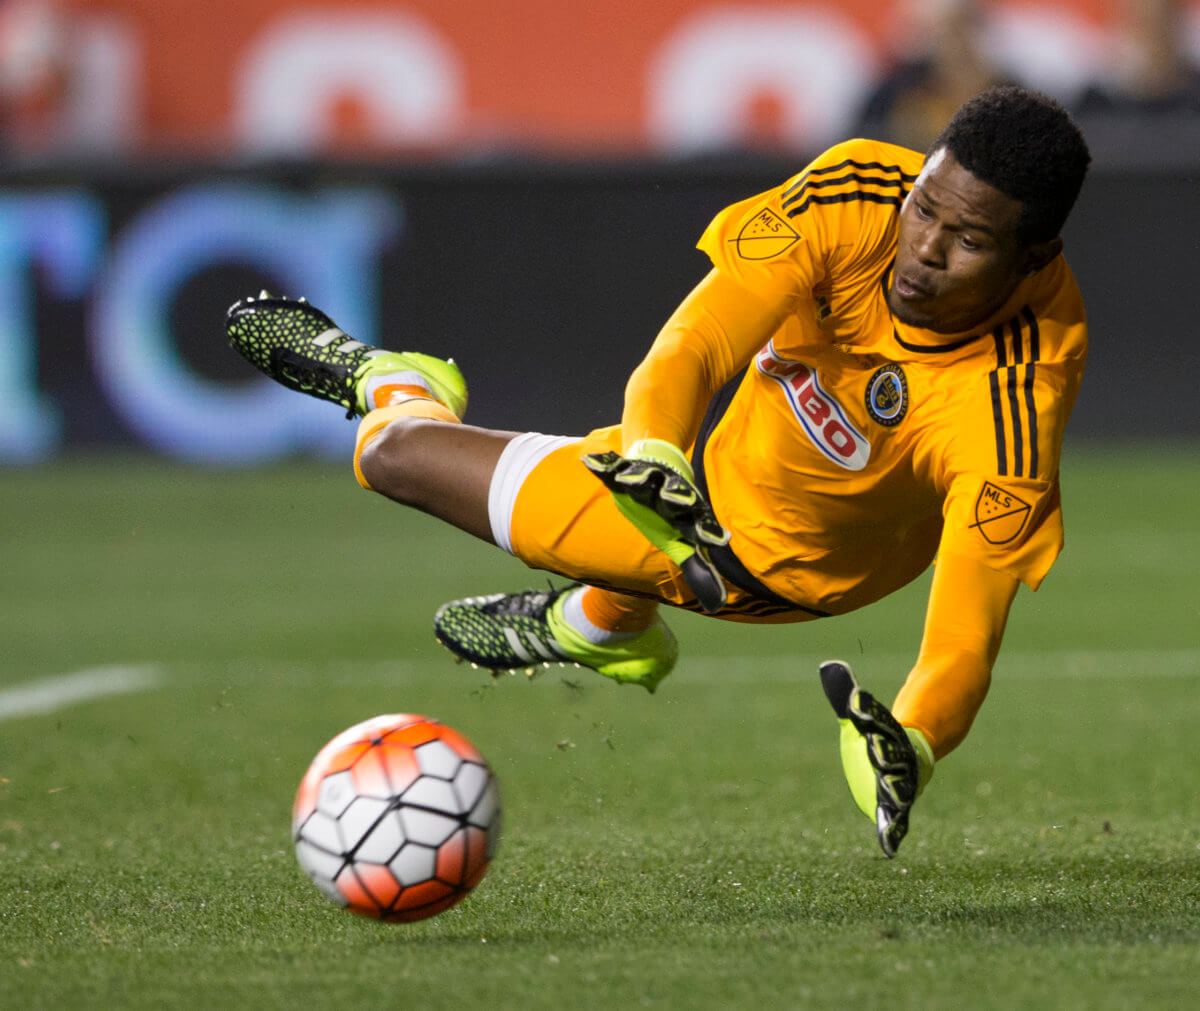 5 players to watch when the Union begin their hunt for the MLS Cup